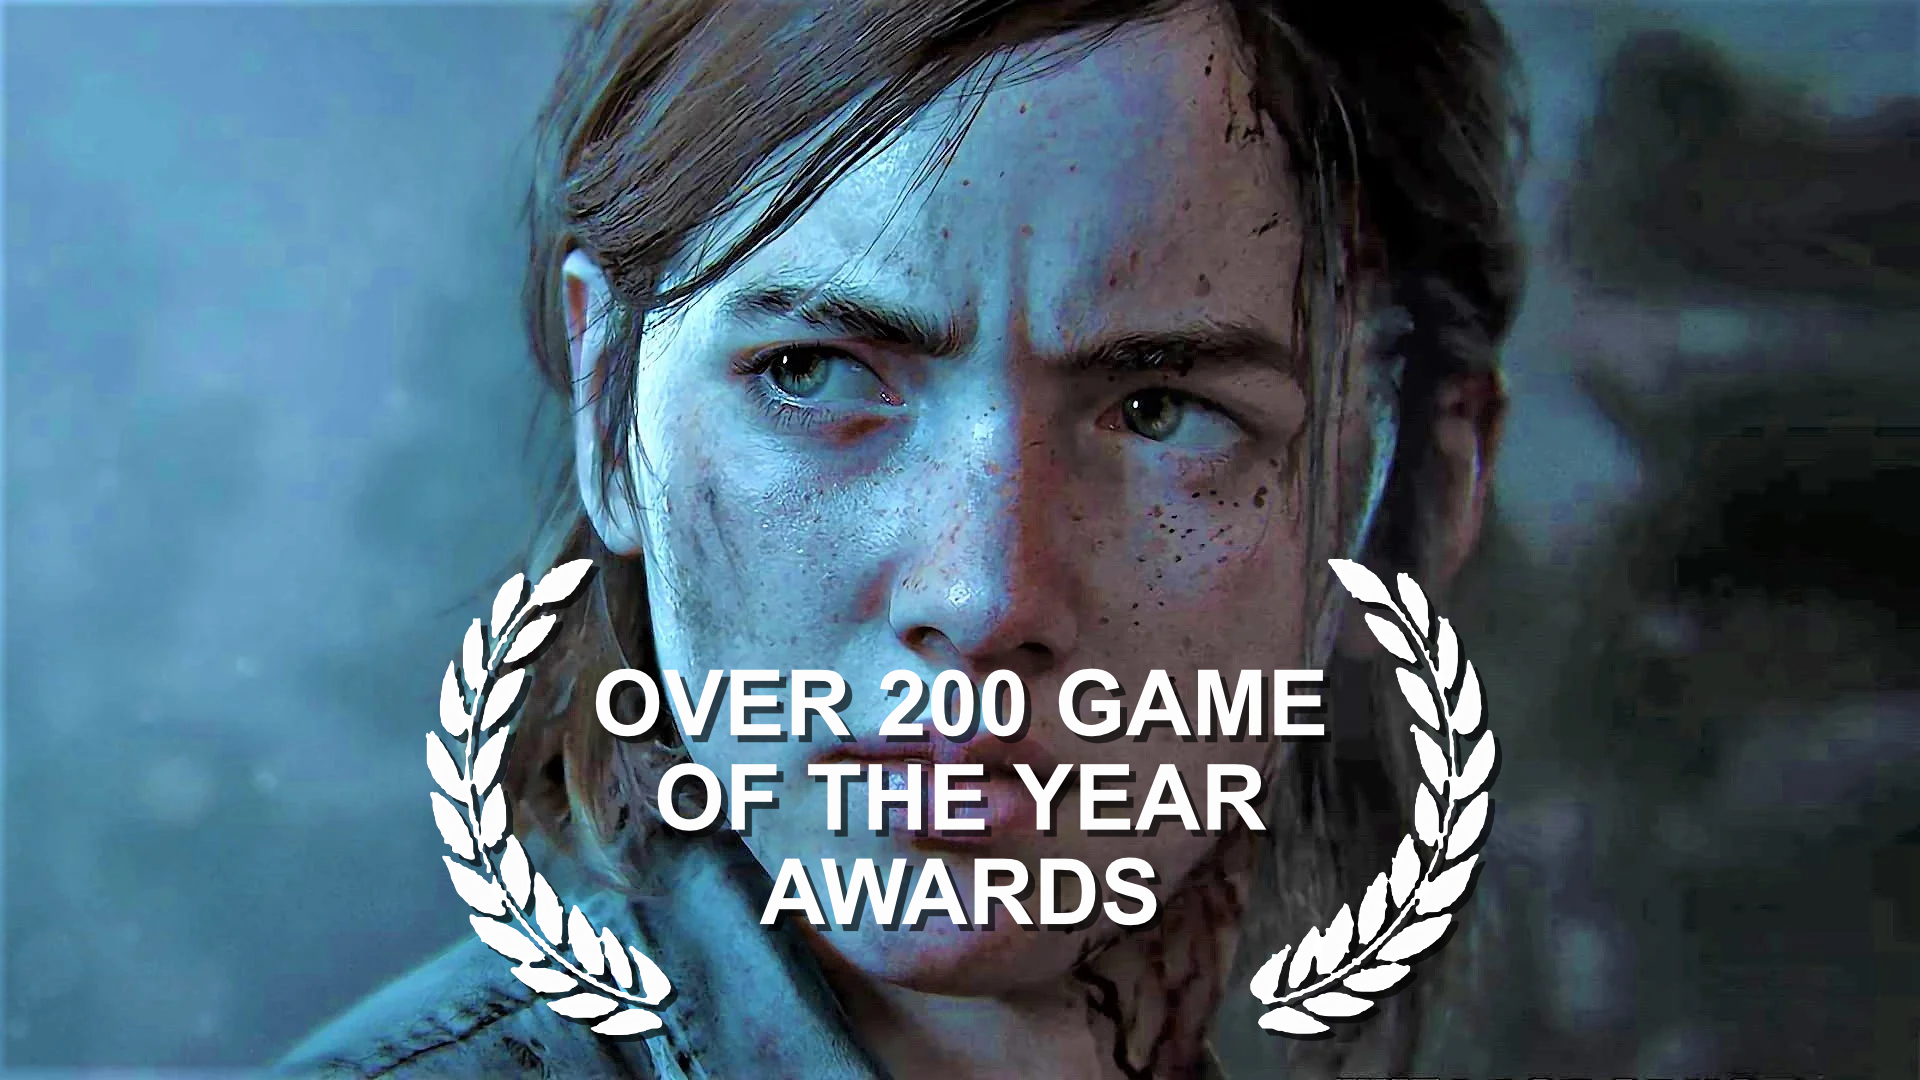 Every game of year. Over 200 game of the year Awards.